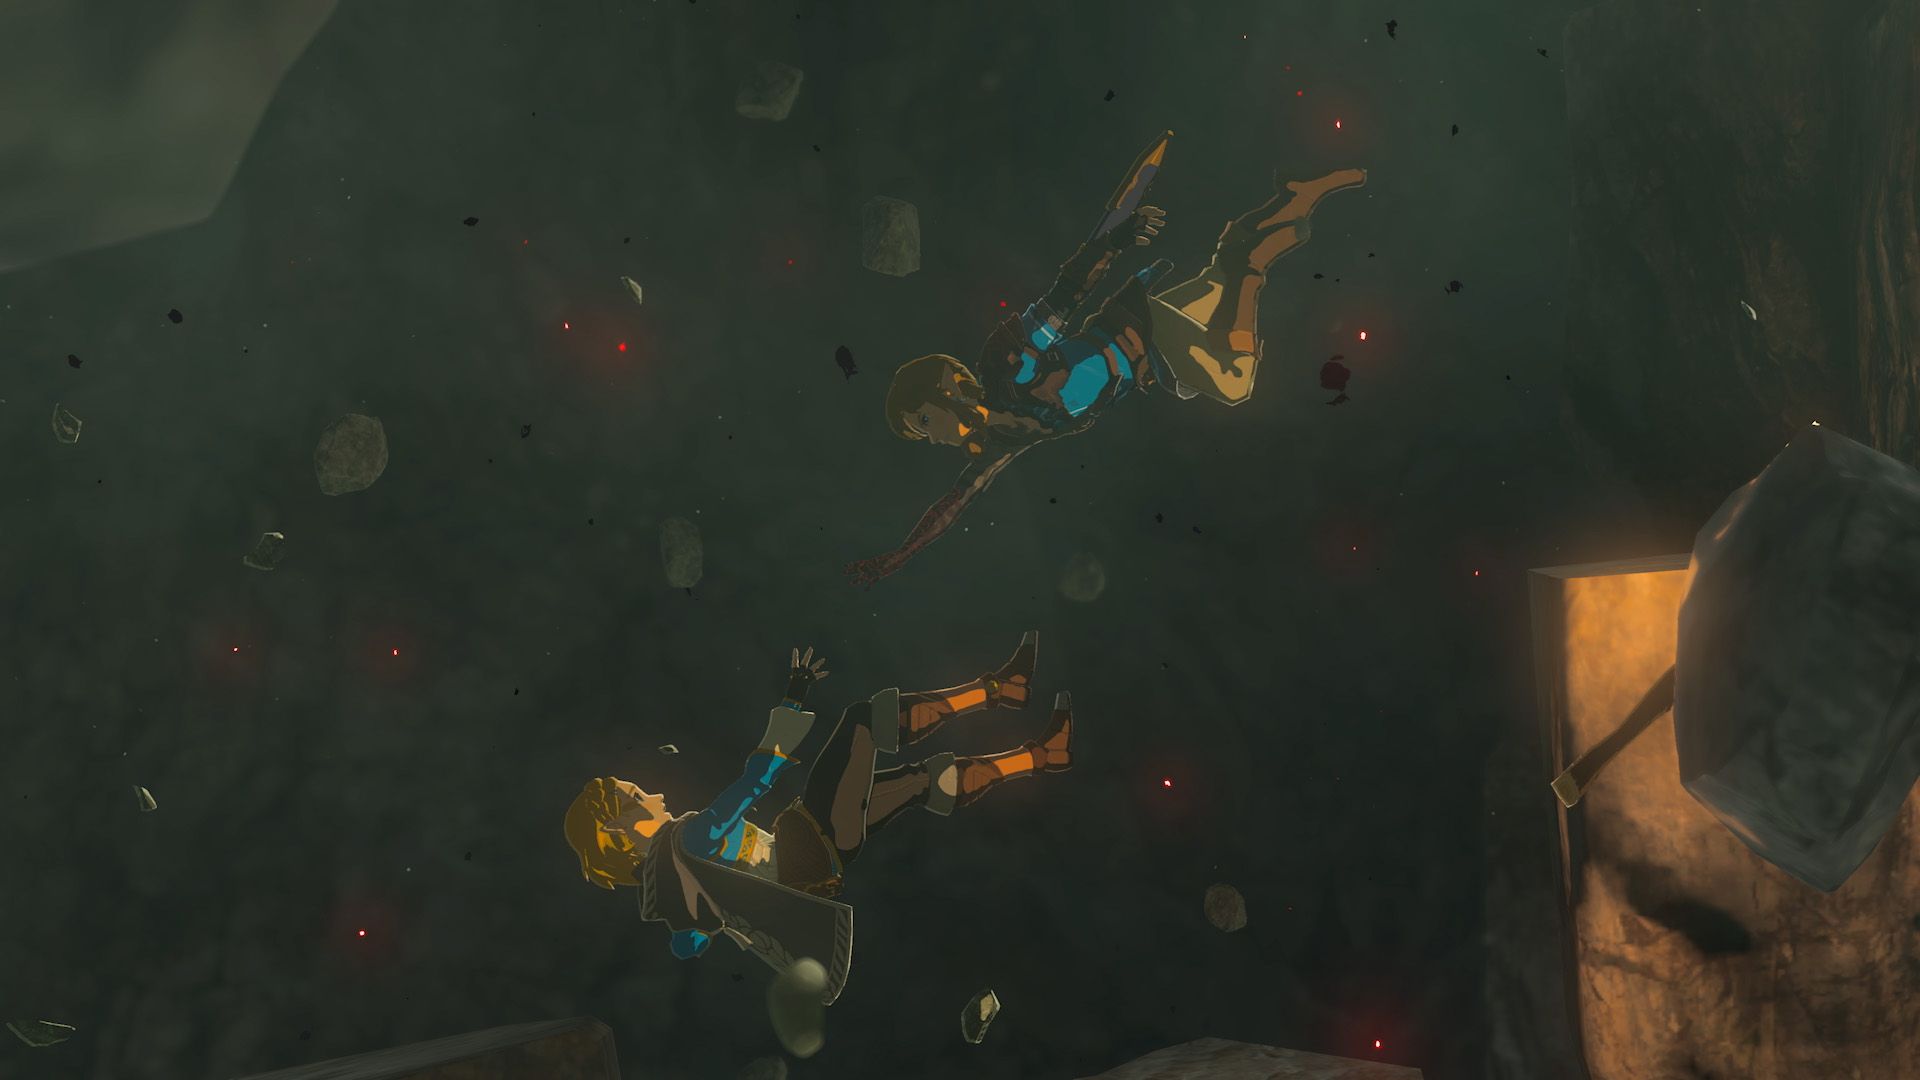 Link reaching to save Zelda in Tears of the Kingdom